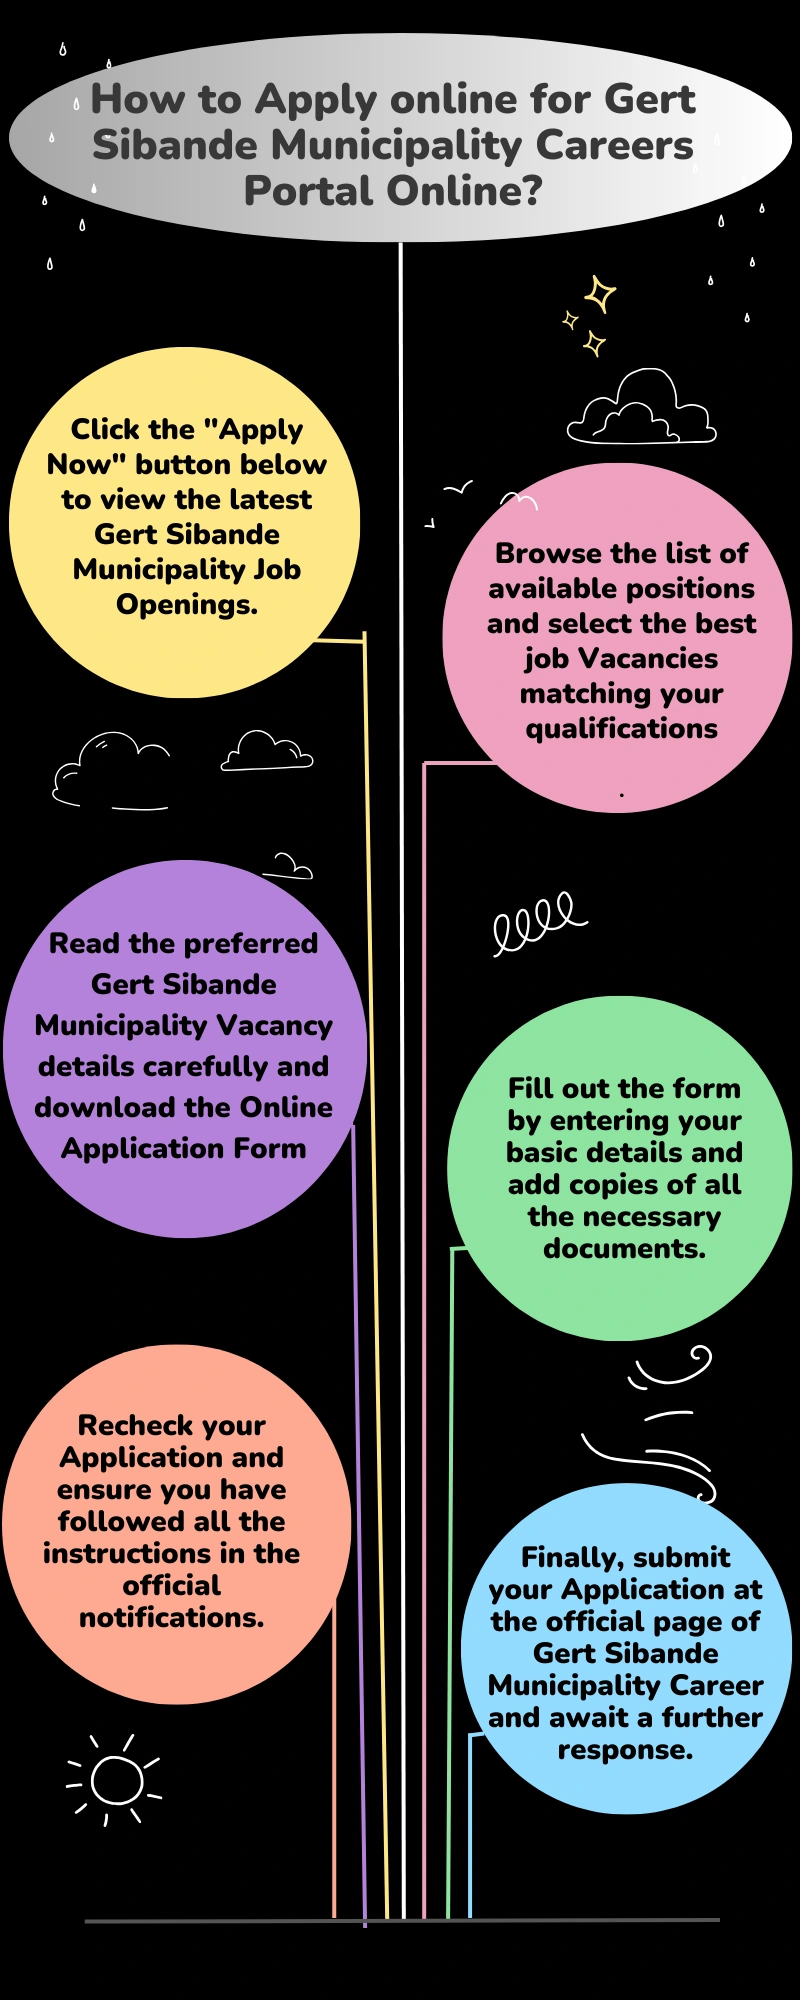 How to Apply online for Gert Sibande Municipality Careers Portal Online?